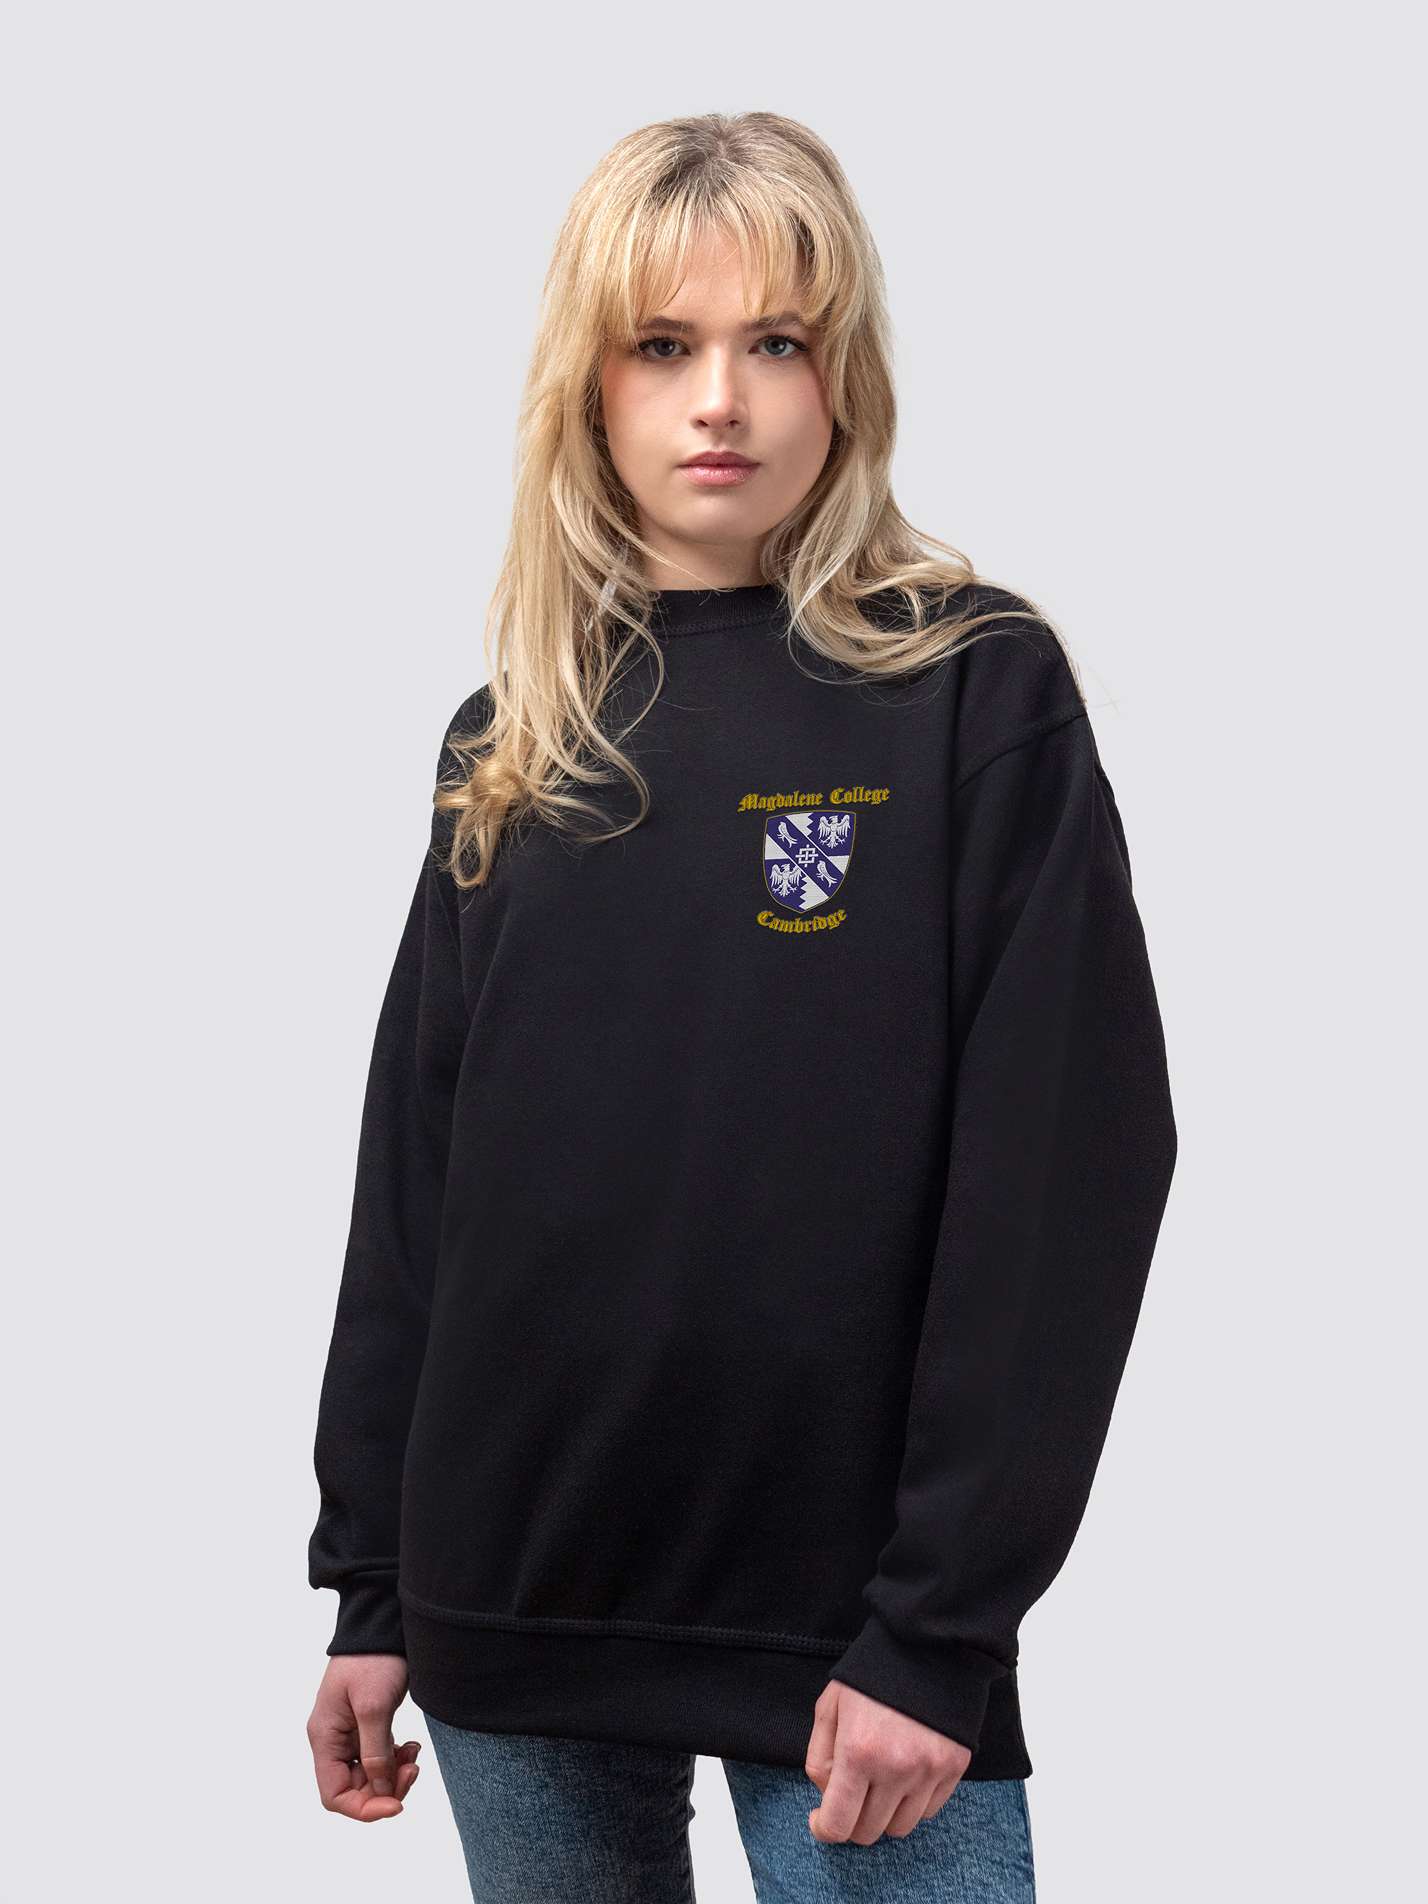 Magdalene crest on the front of a black, crew-neck sweatshirt